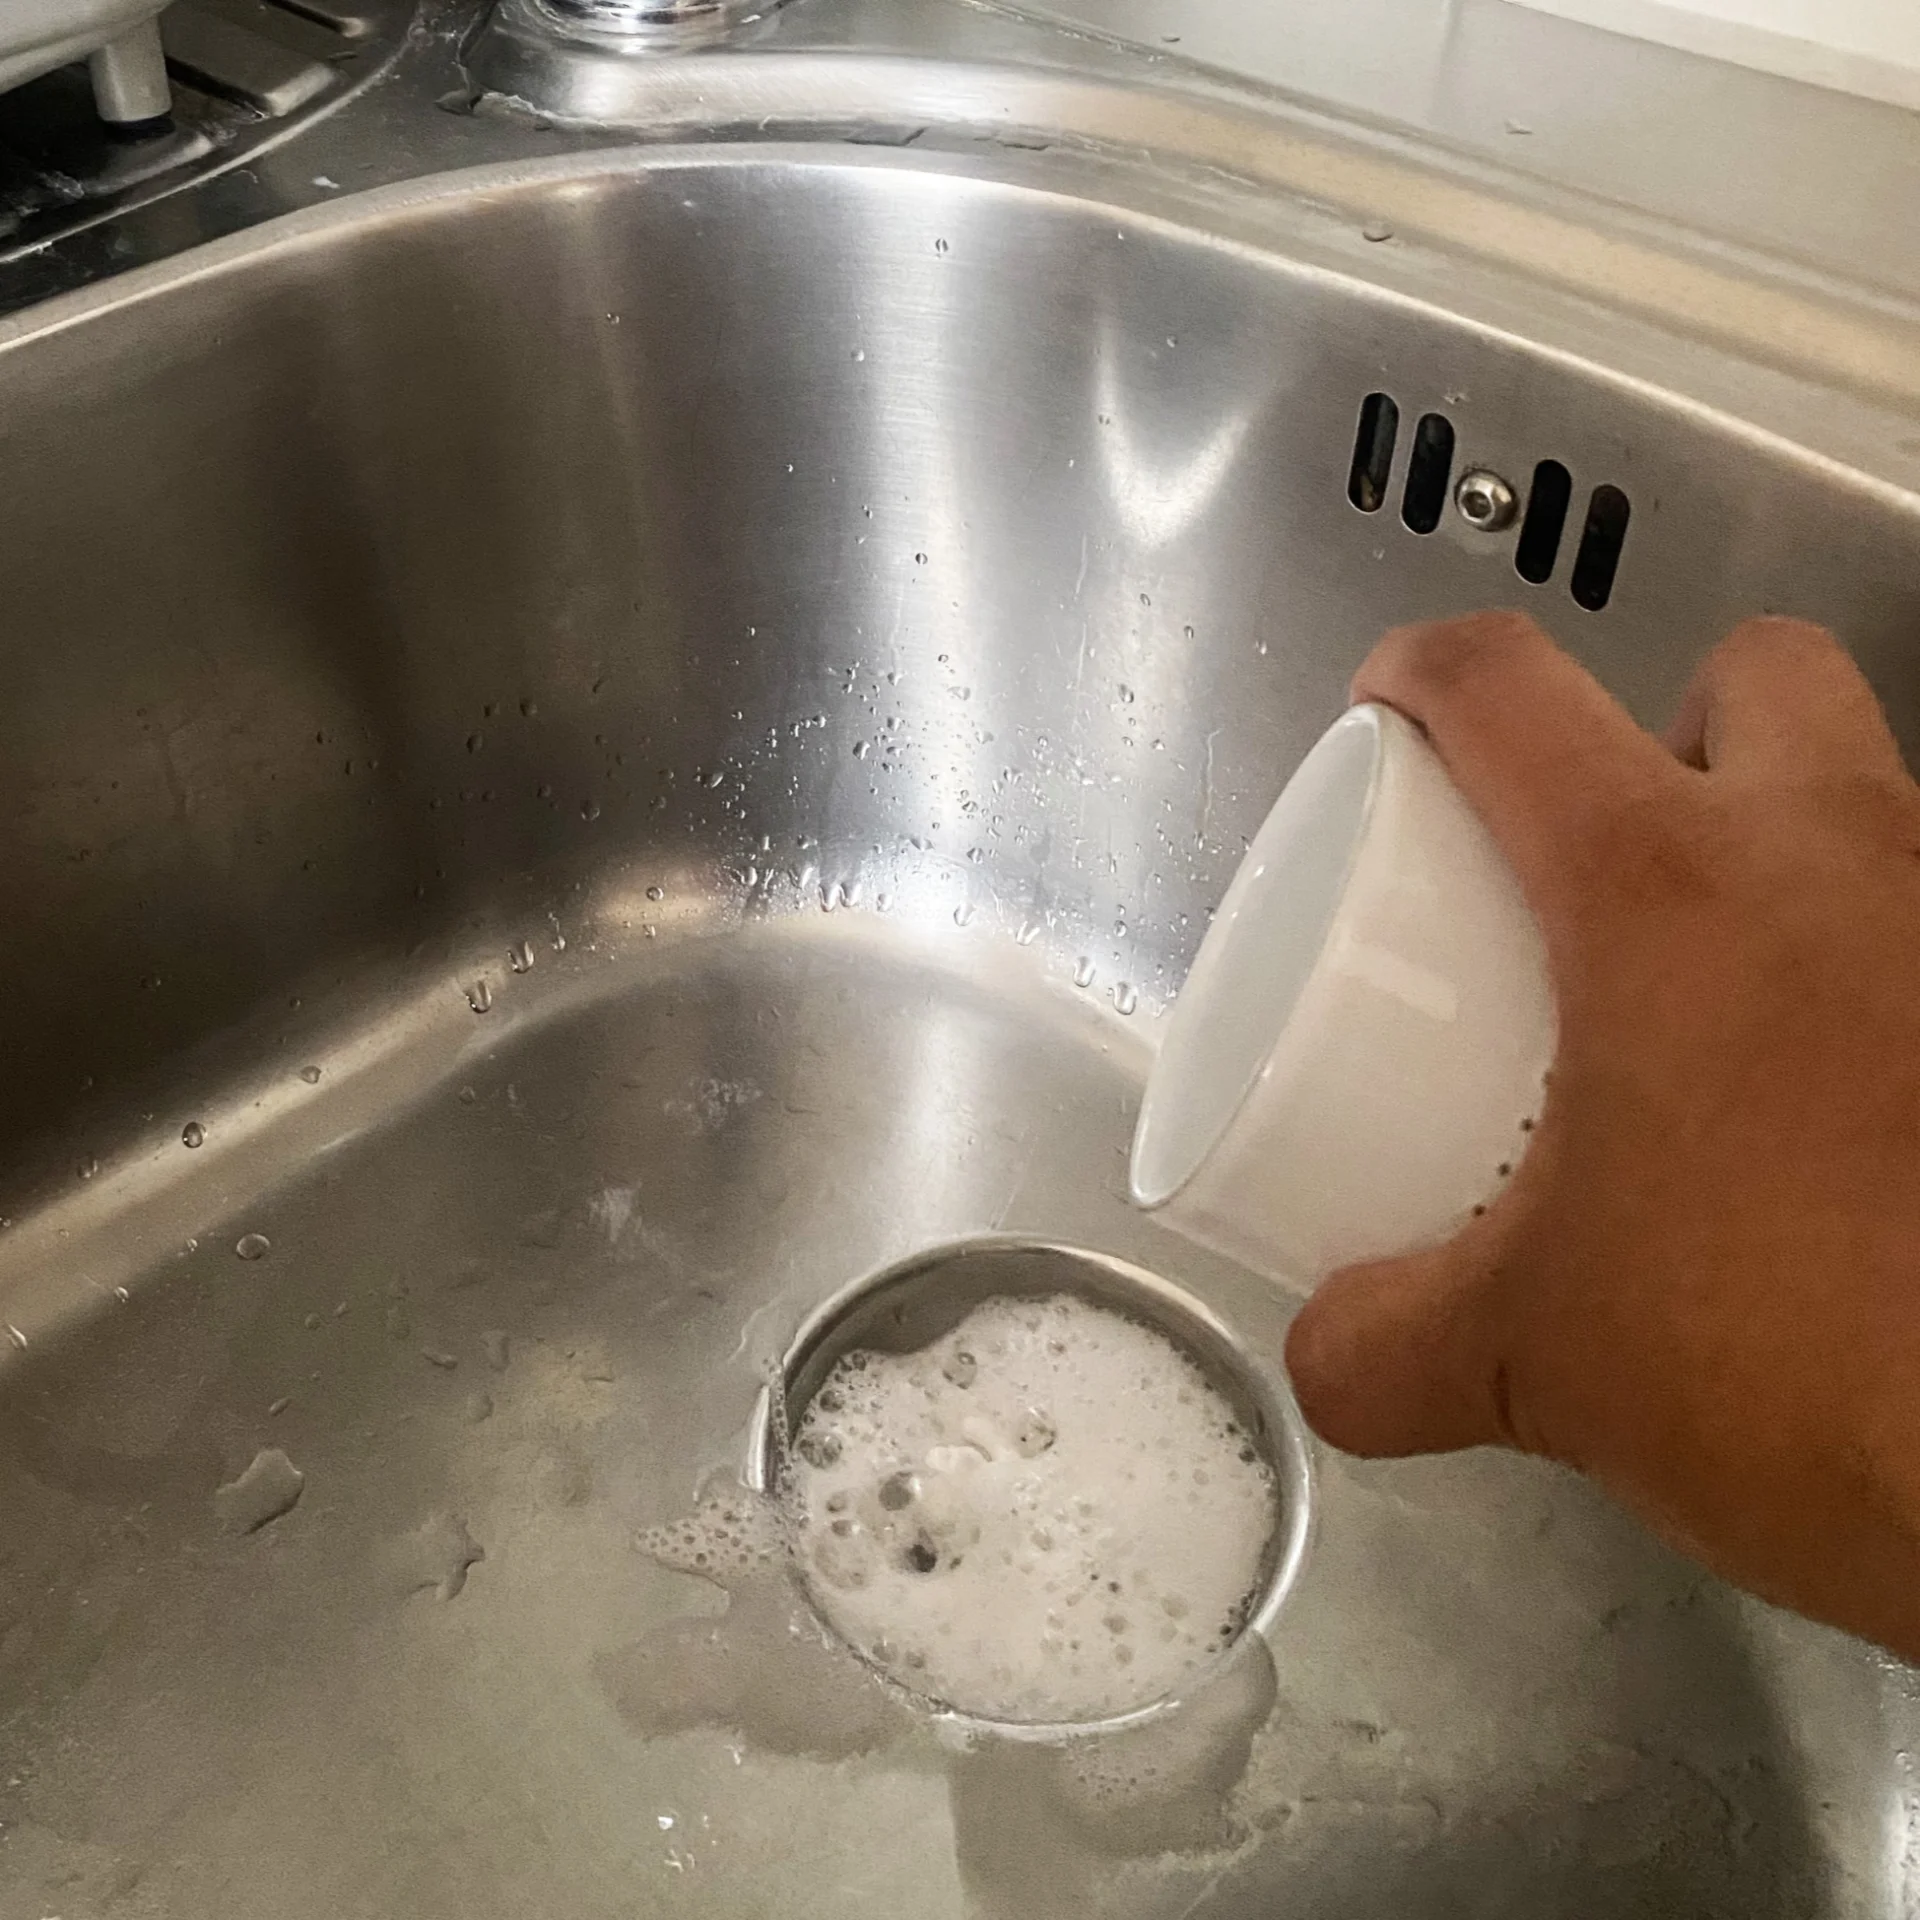 Using baking soda to clean drains